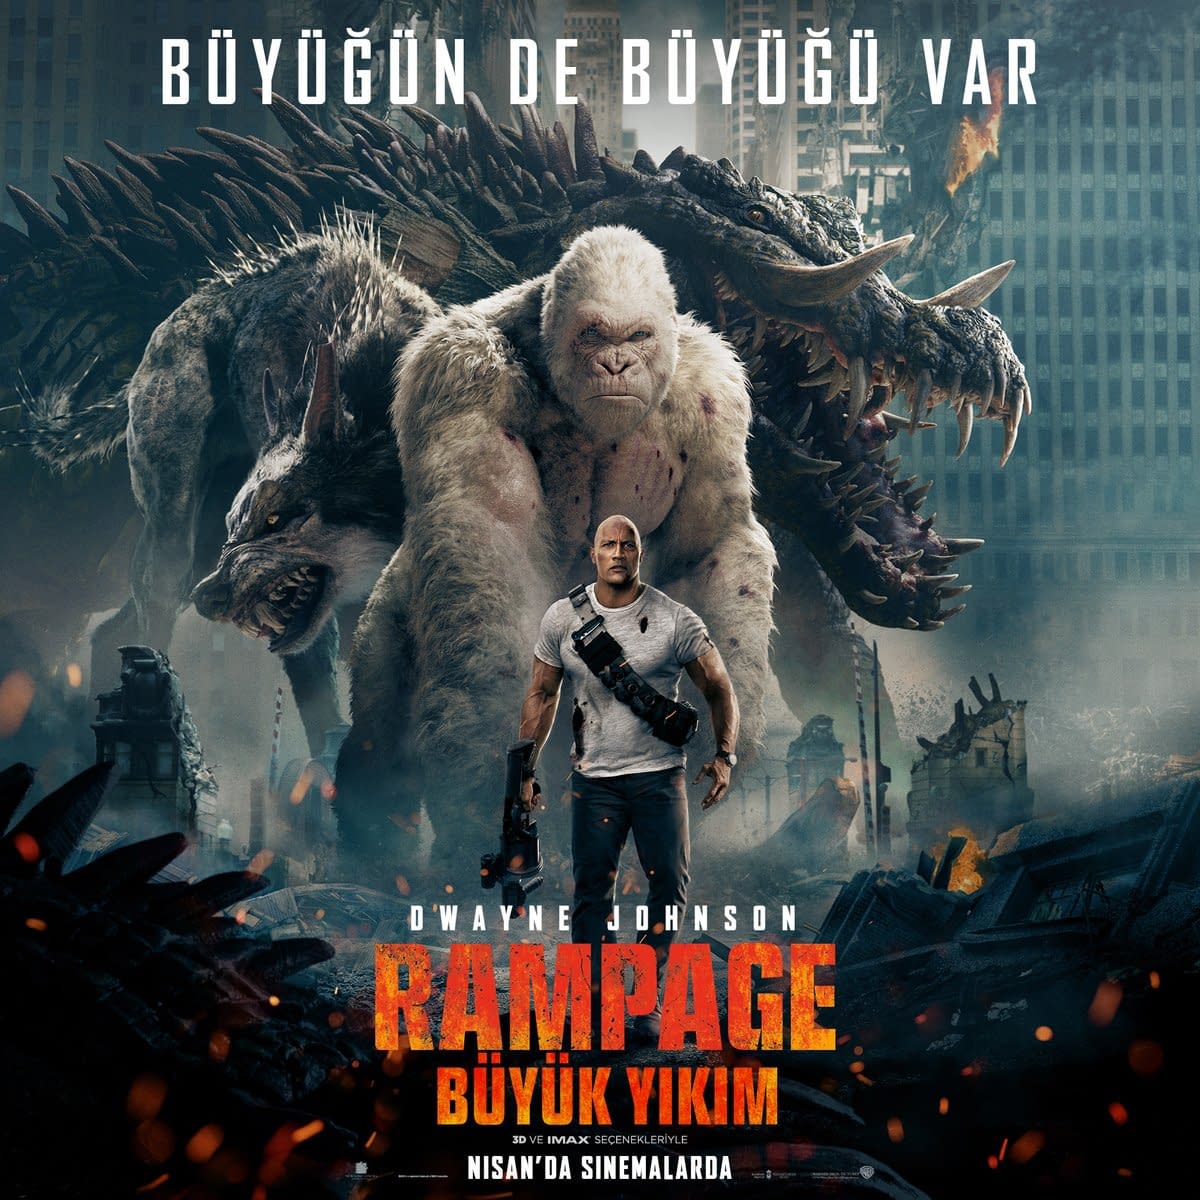 New International Posters for Rampage Show Off All 3 Monsters